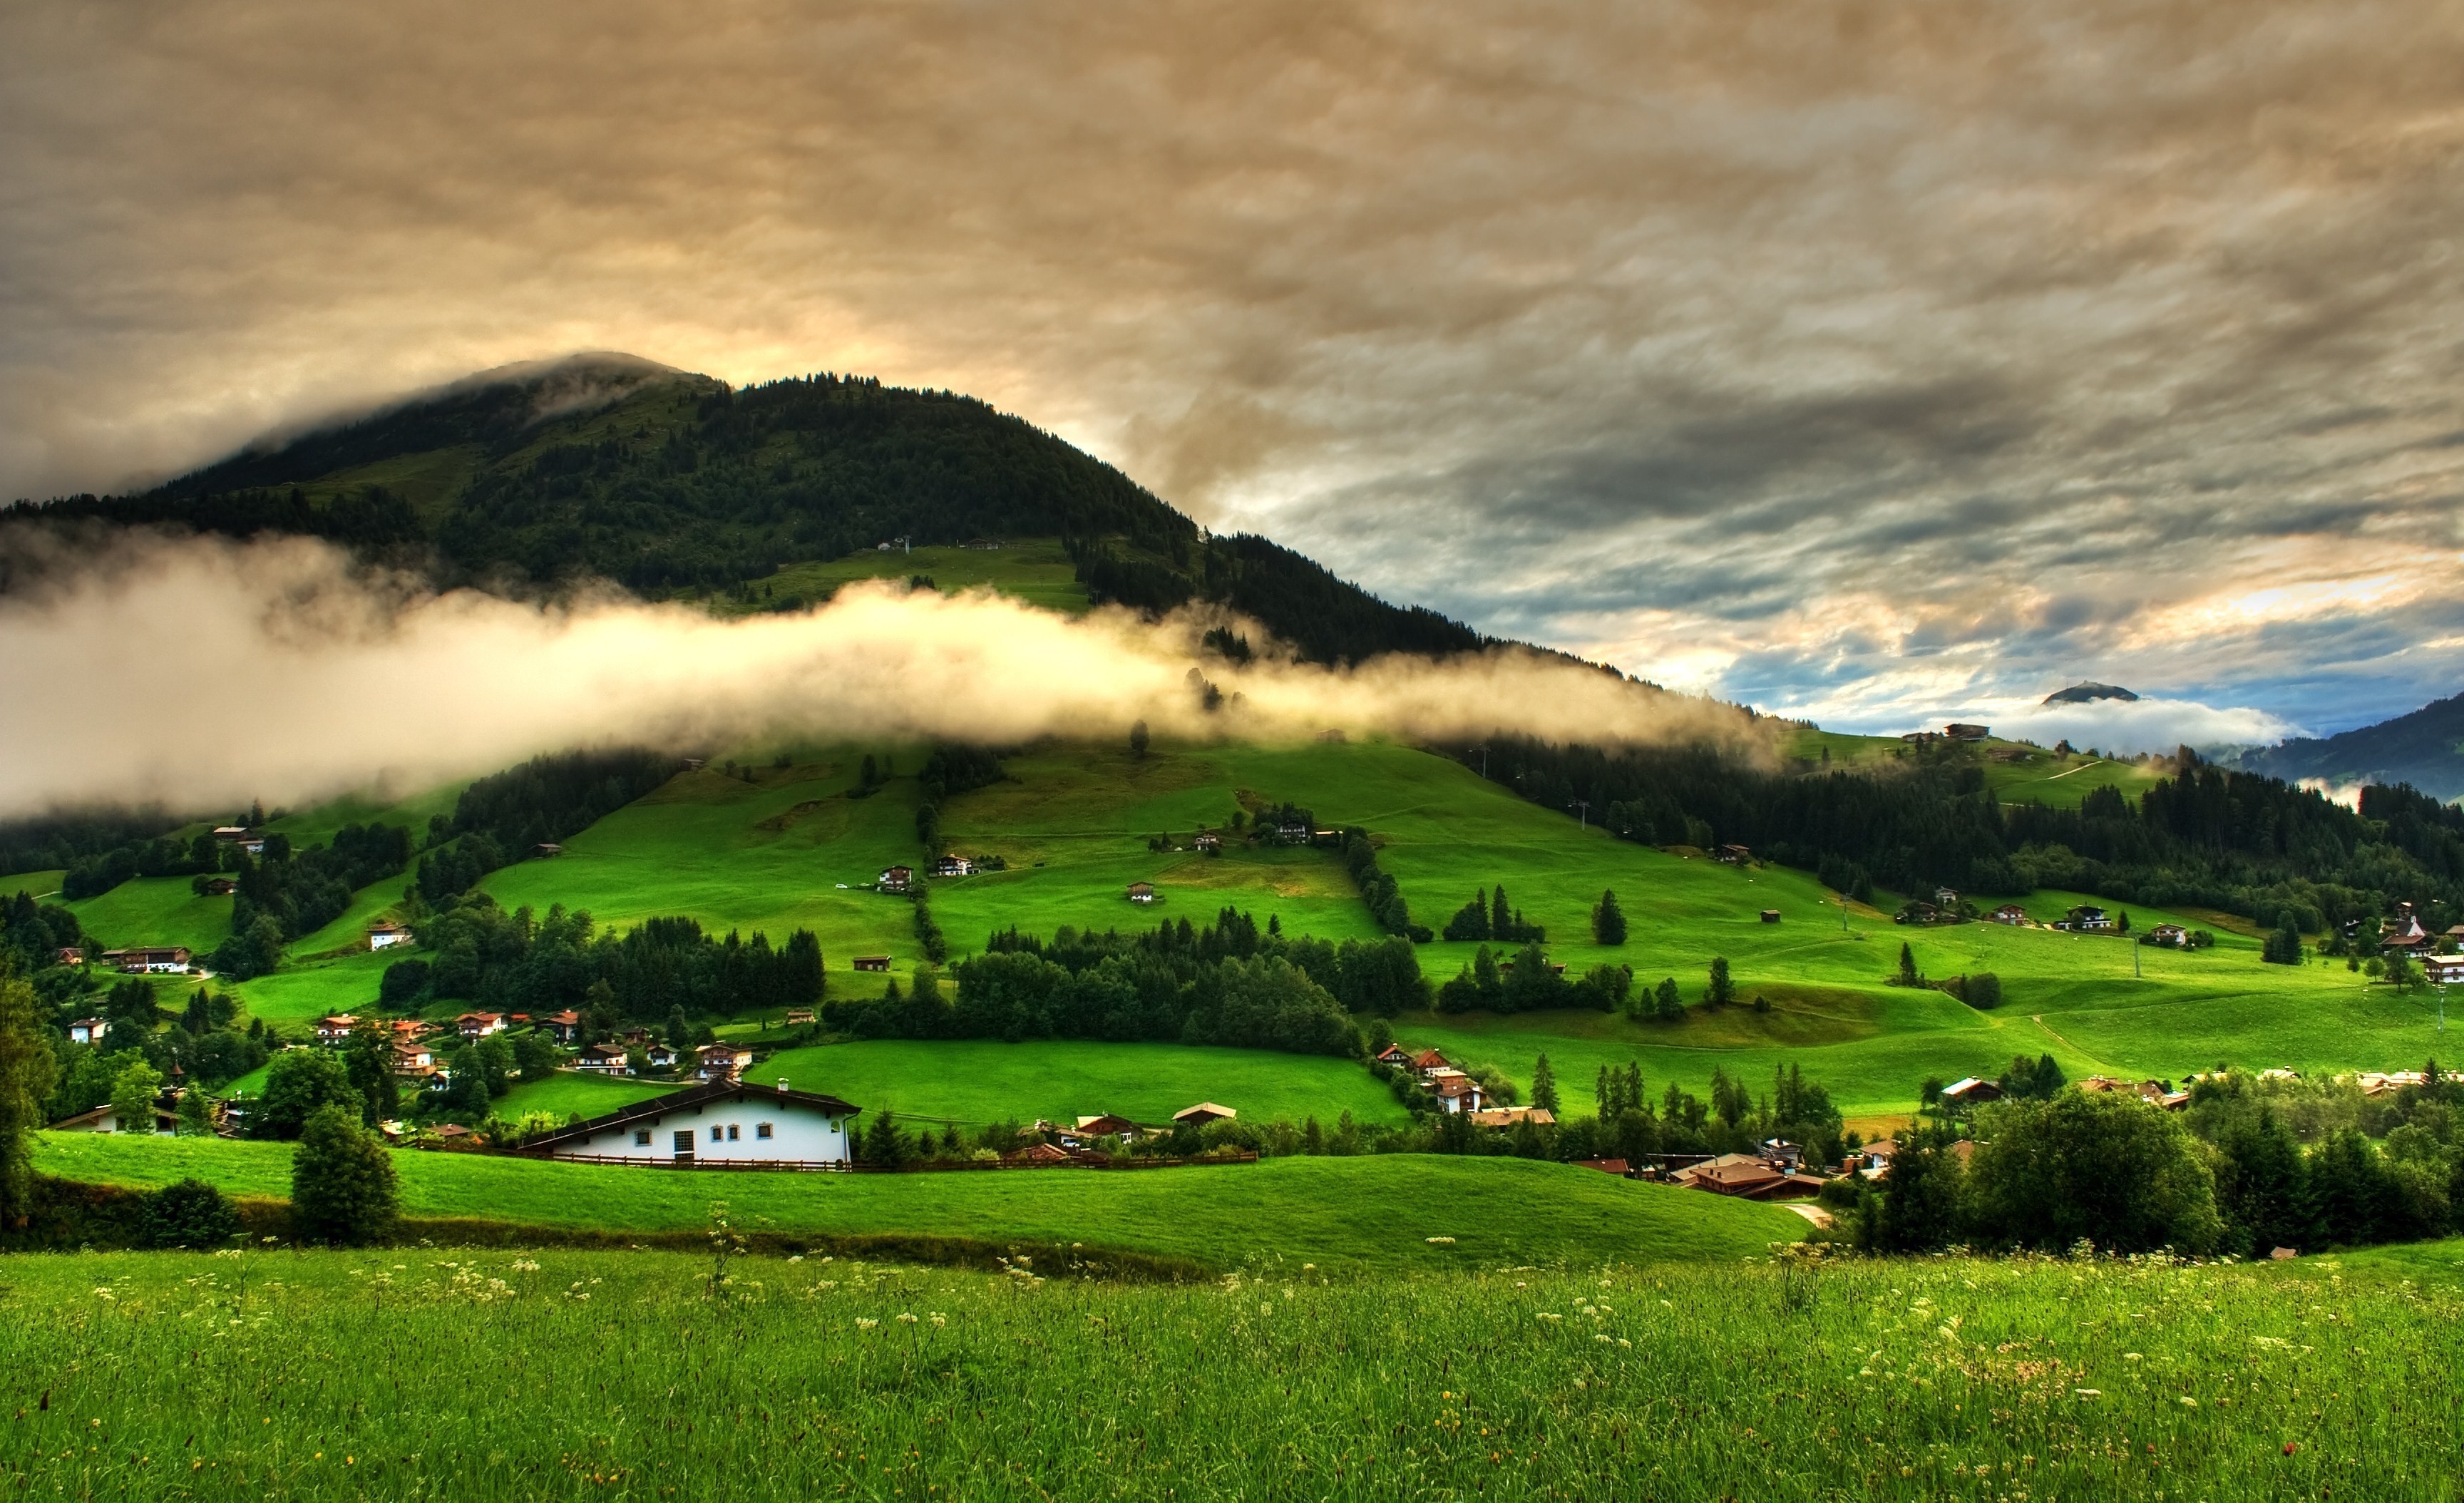 hills, Trees, Landscape, Grass, Clouds, Field, Village, Mountains, Greenery, Home, Sky Wallpaper